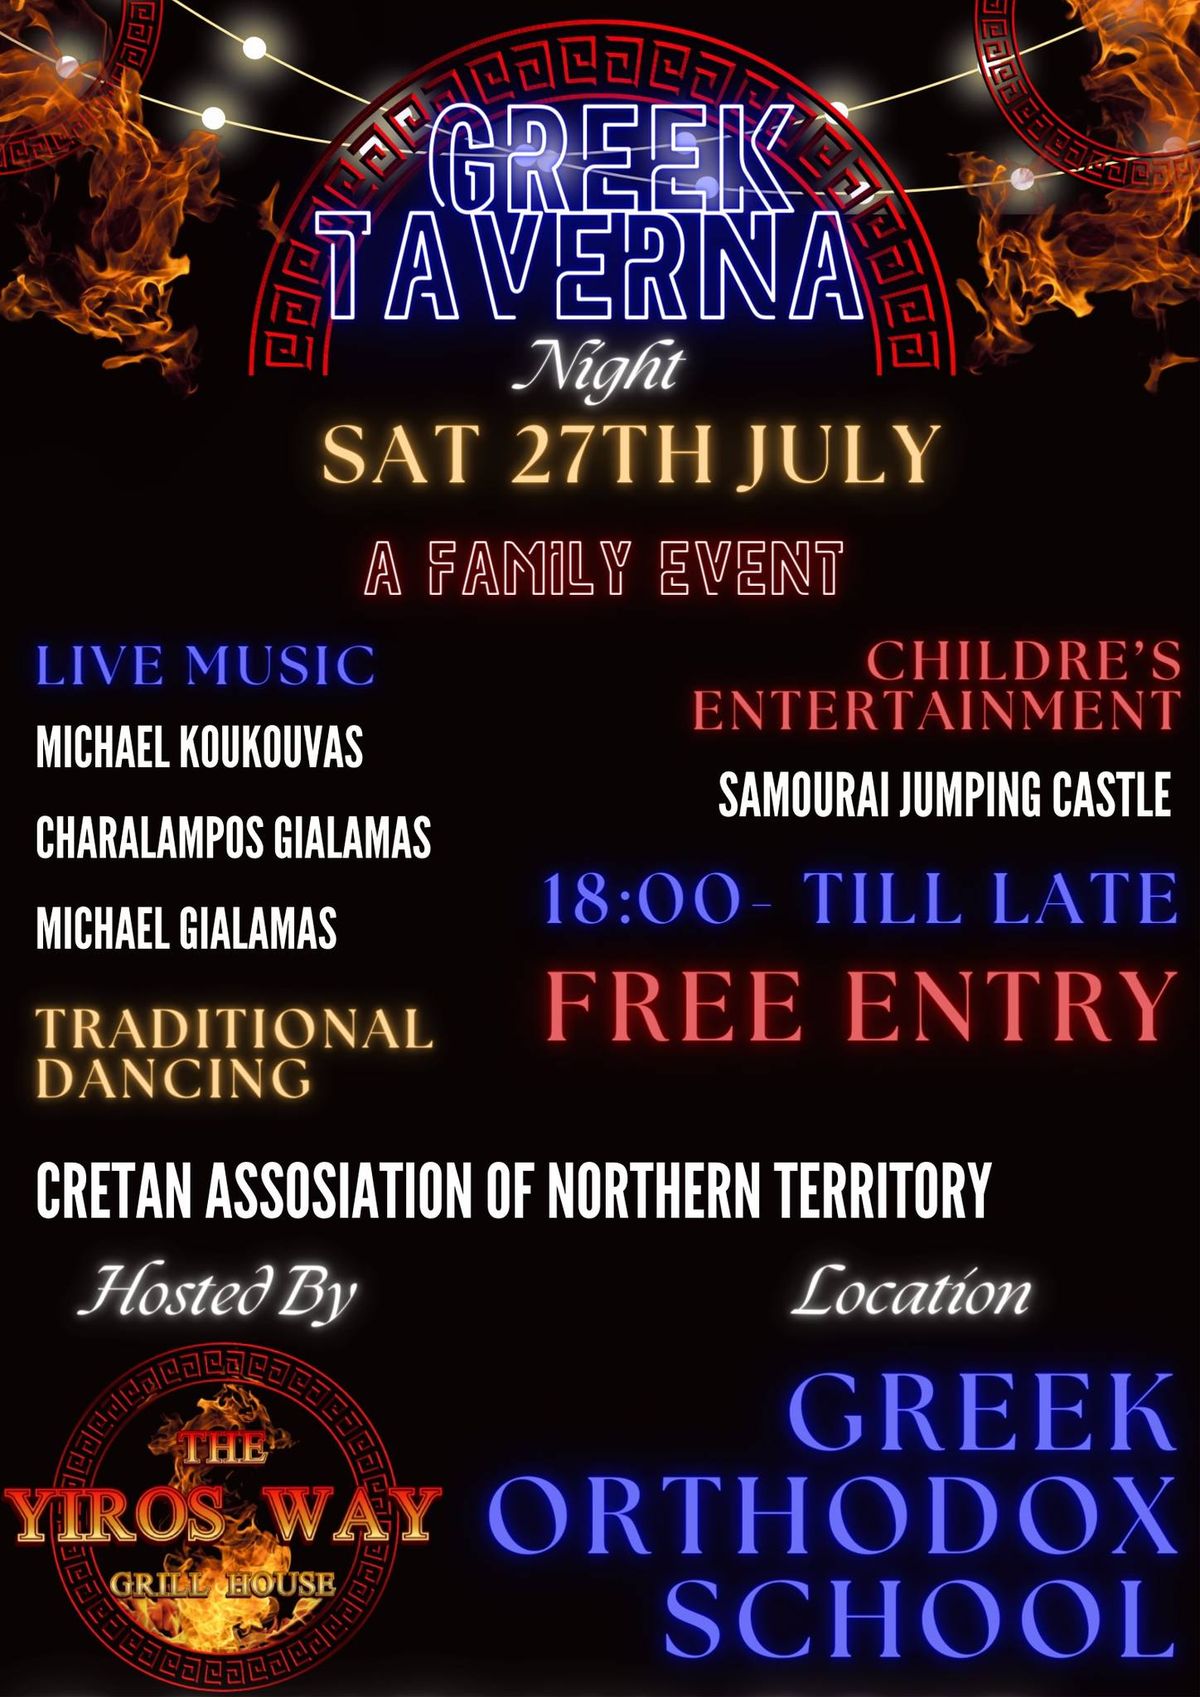 GREEK TAVERNA NIGHT!! A FAMILY EVENT BROUGH TO YOU BY THE YIROS WAY!! 